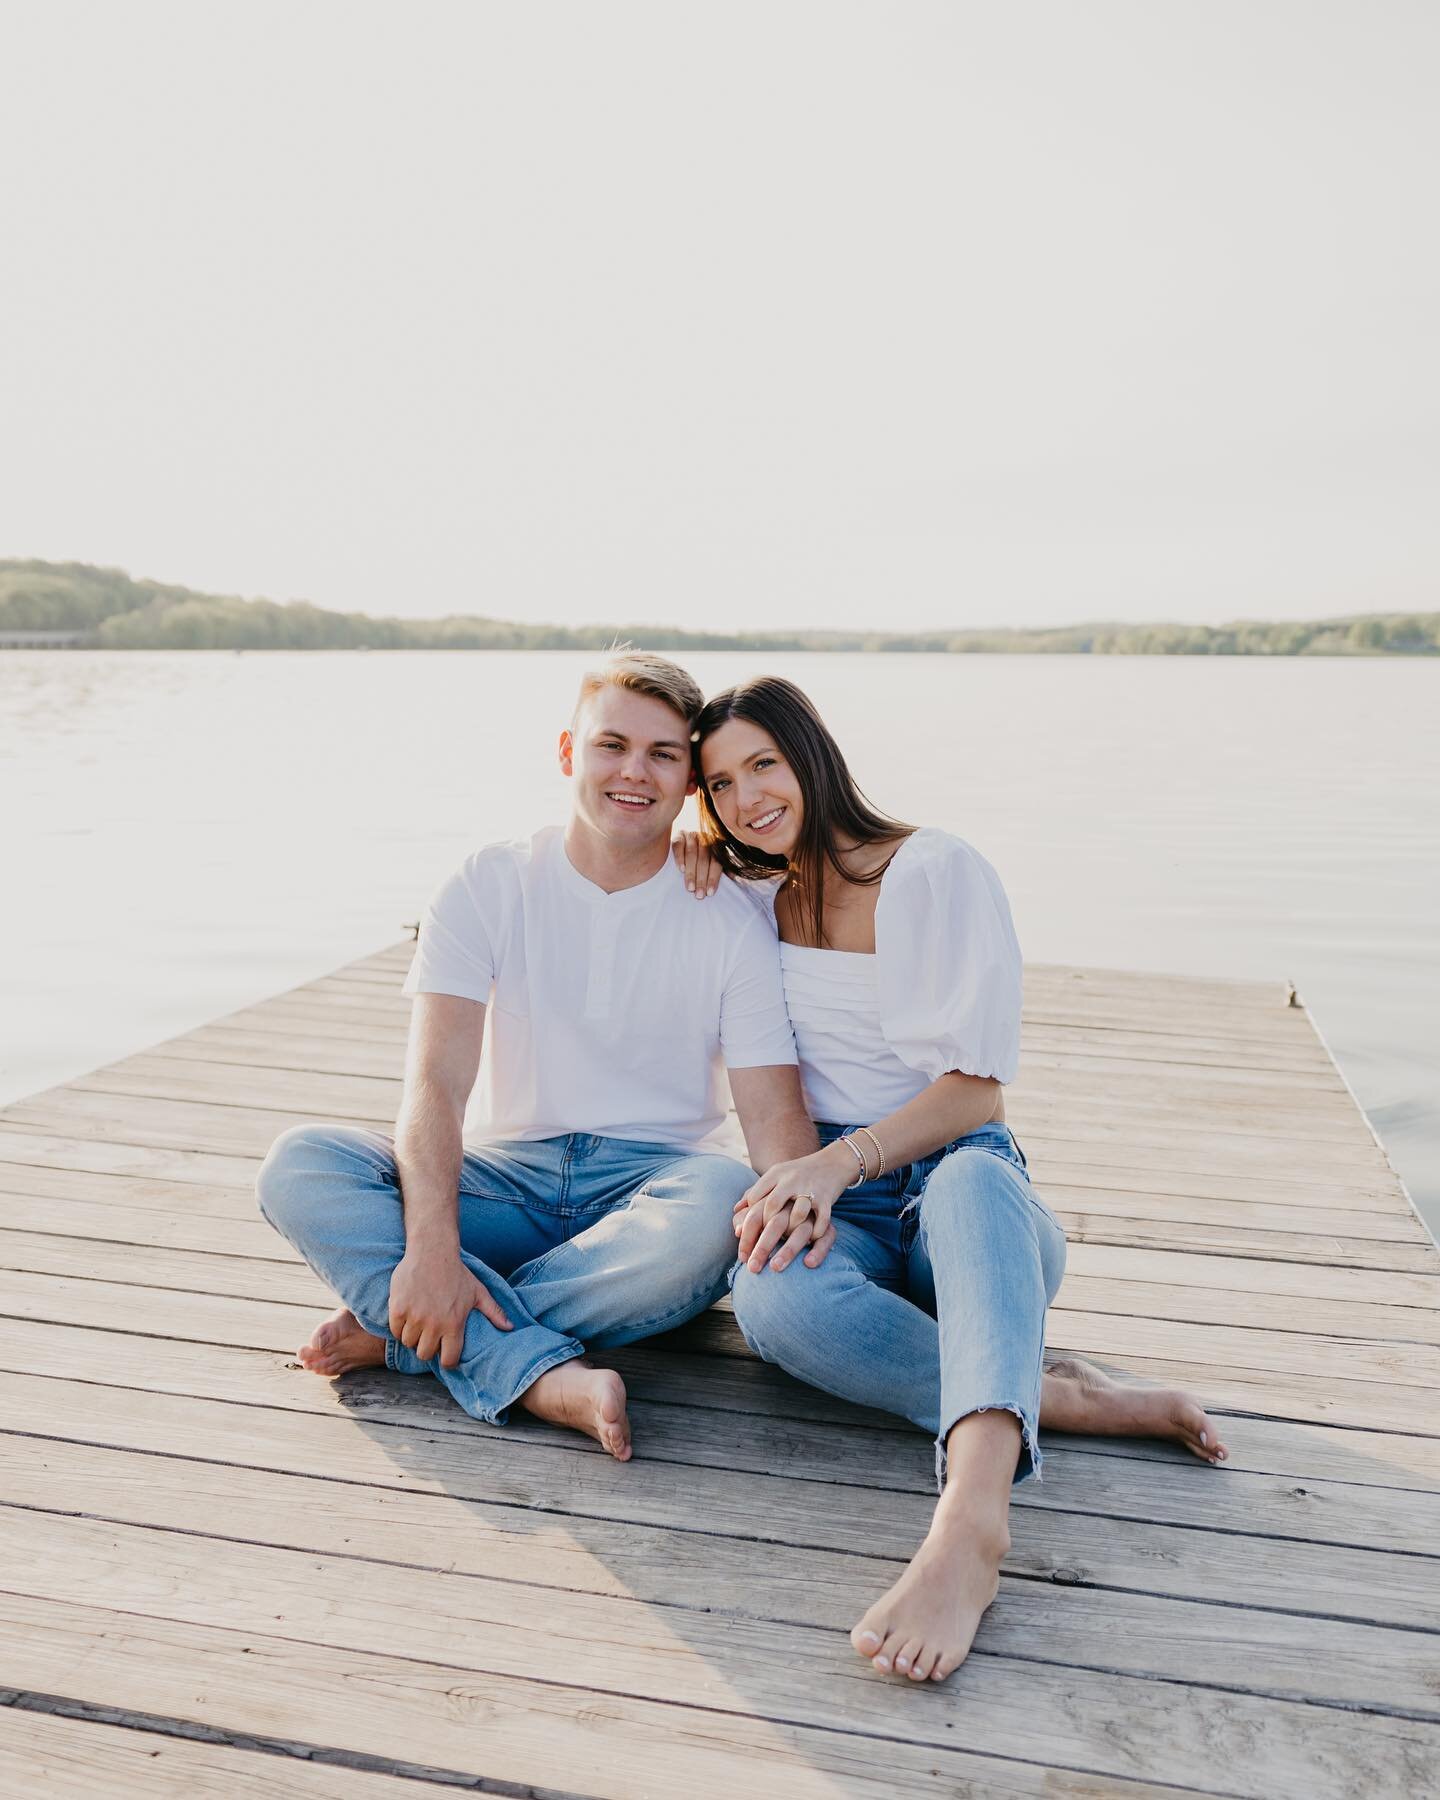 Moraine State Park at sunset was utter perfection for Jenna and Noah&rsquo;s engagement session! They are the absolute sweetest and we had so much fun 🤩 can&rsquo;t wait for July!

#lizegbertphoto #portraitphotography #engagementphotos #engaged #wed